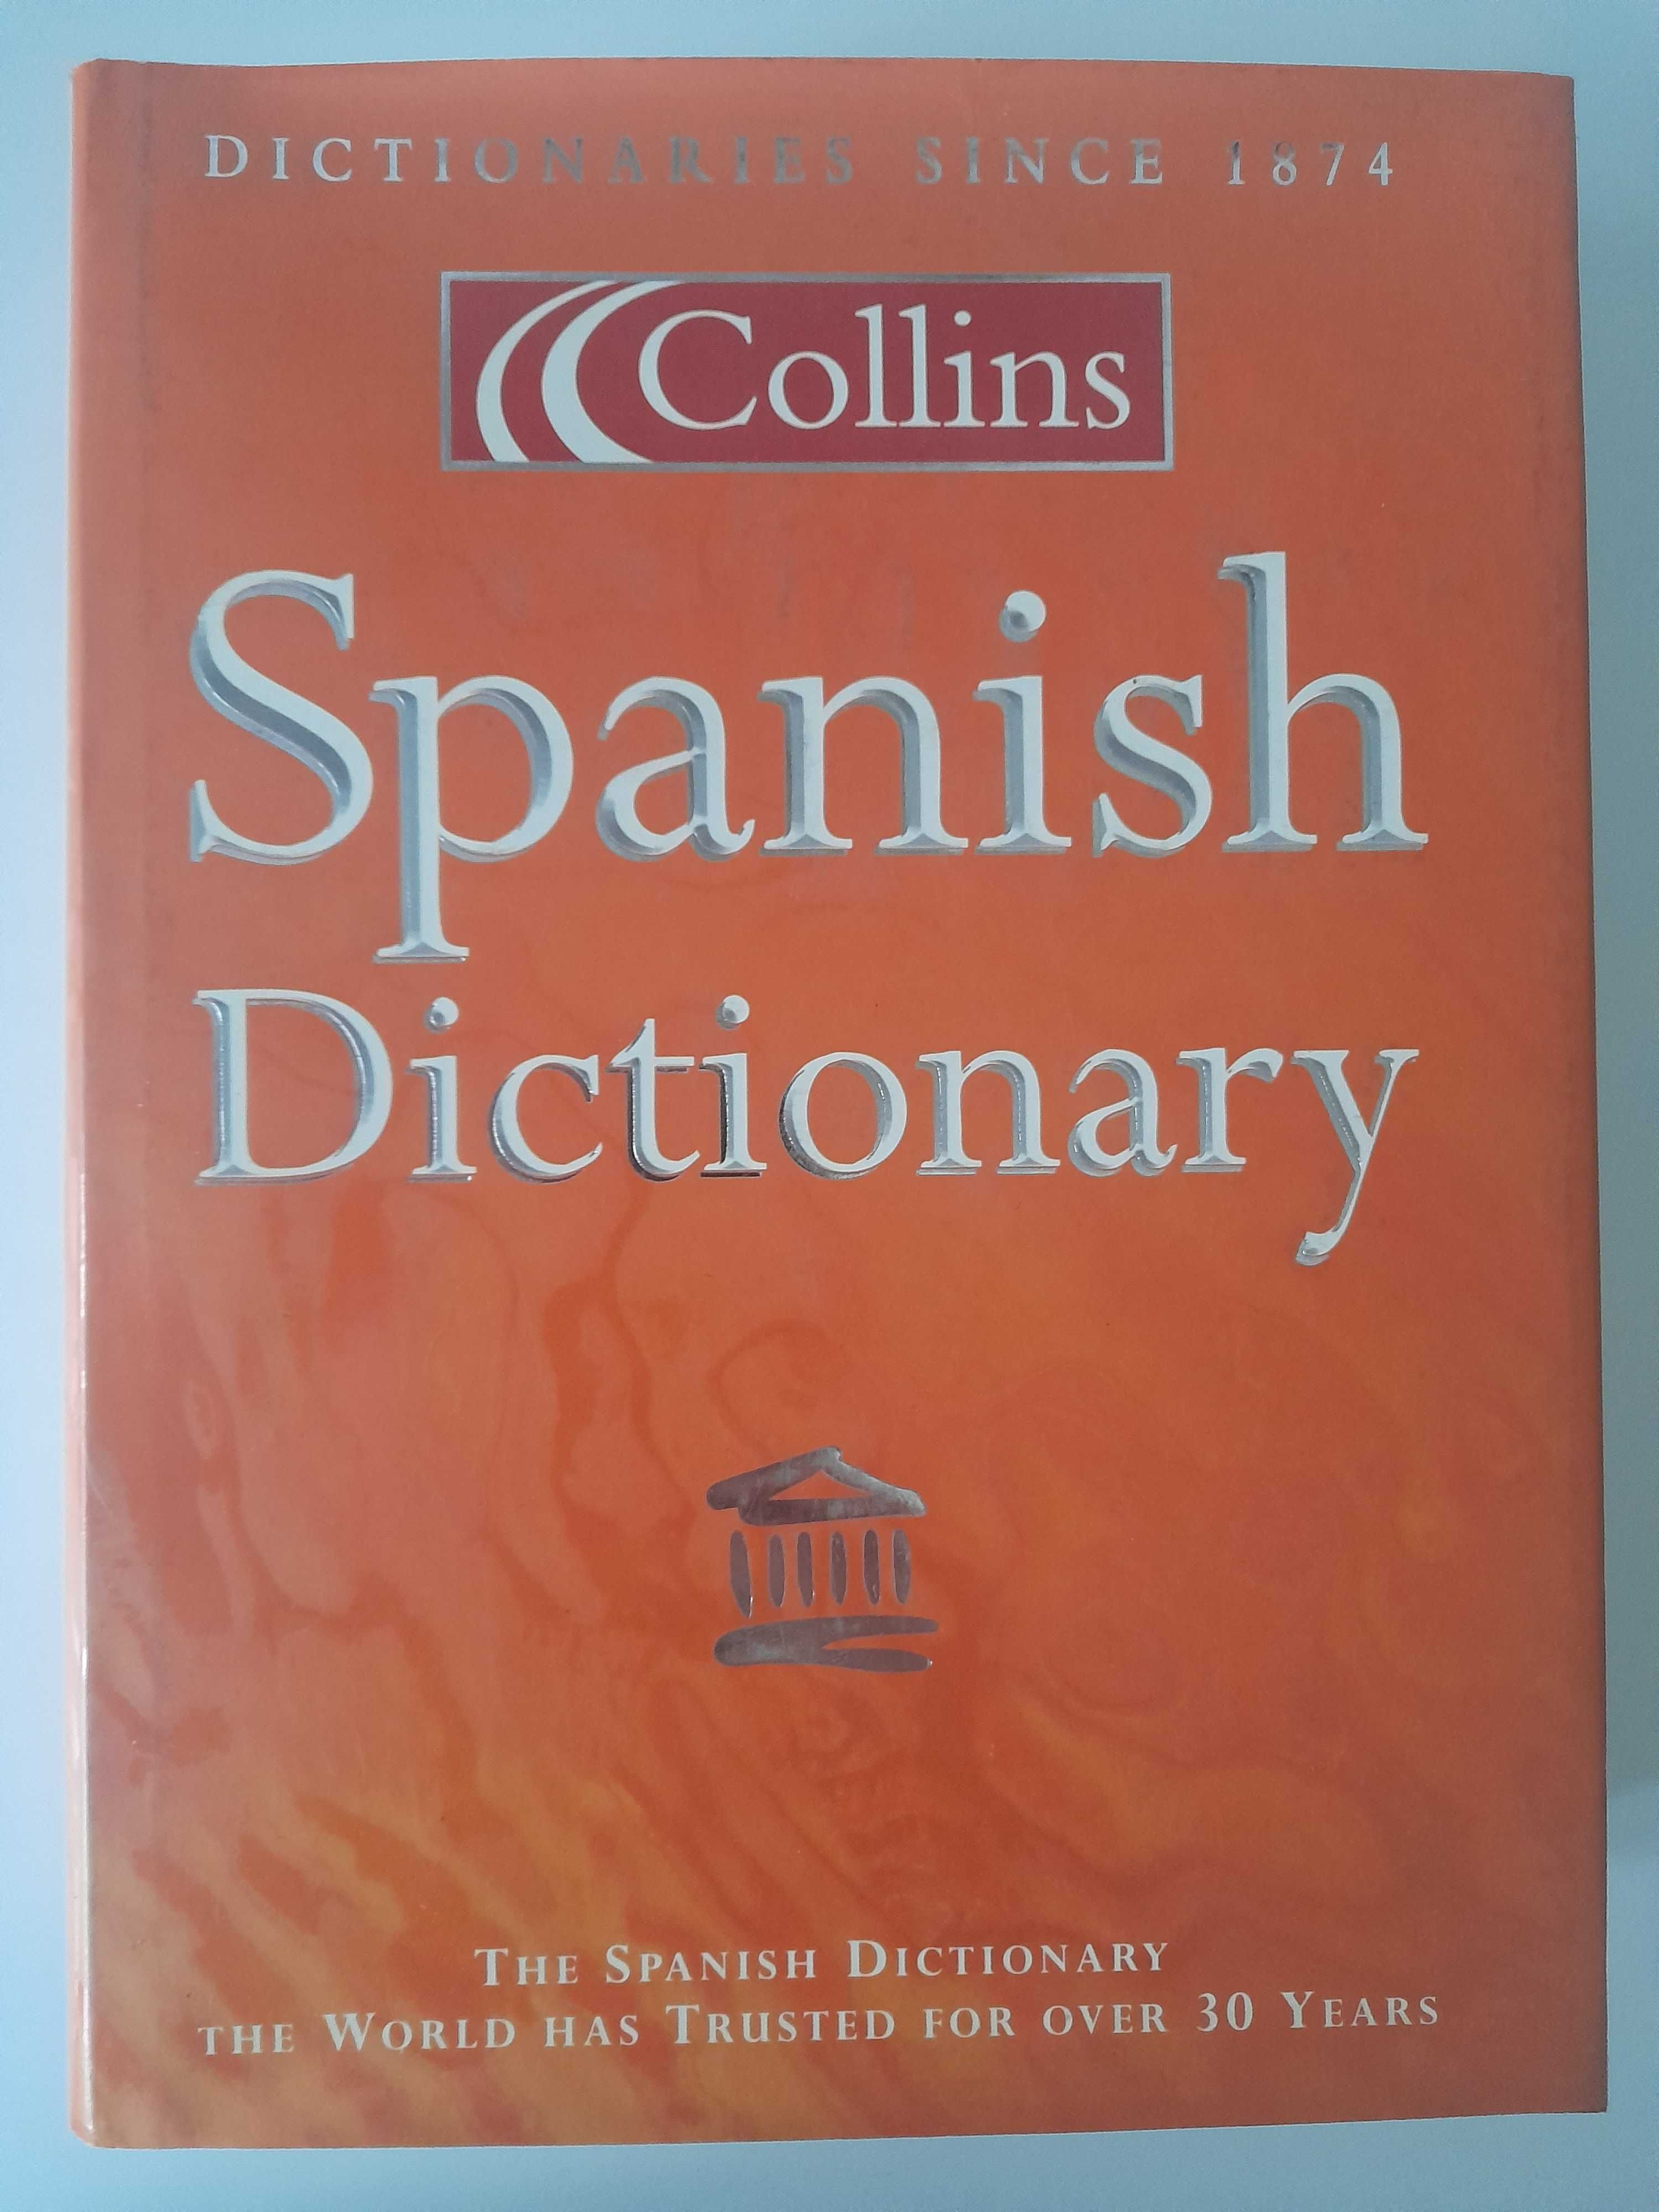 Spanish Dictionary Collins